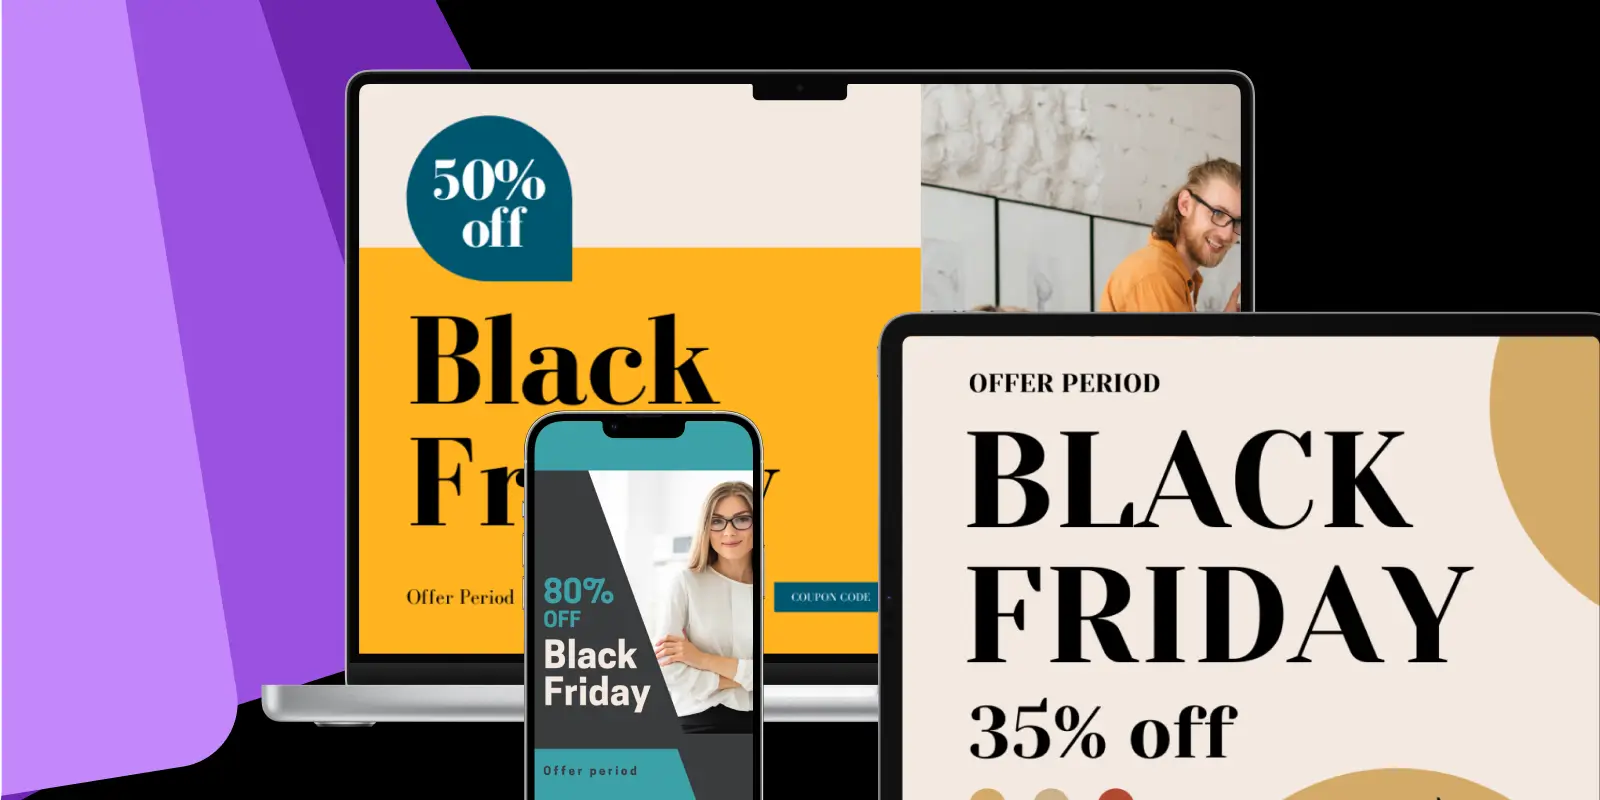 11 Creative Coupon Promo Code Ideas that Work [With Use Cases]